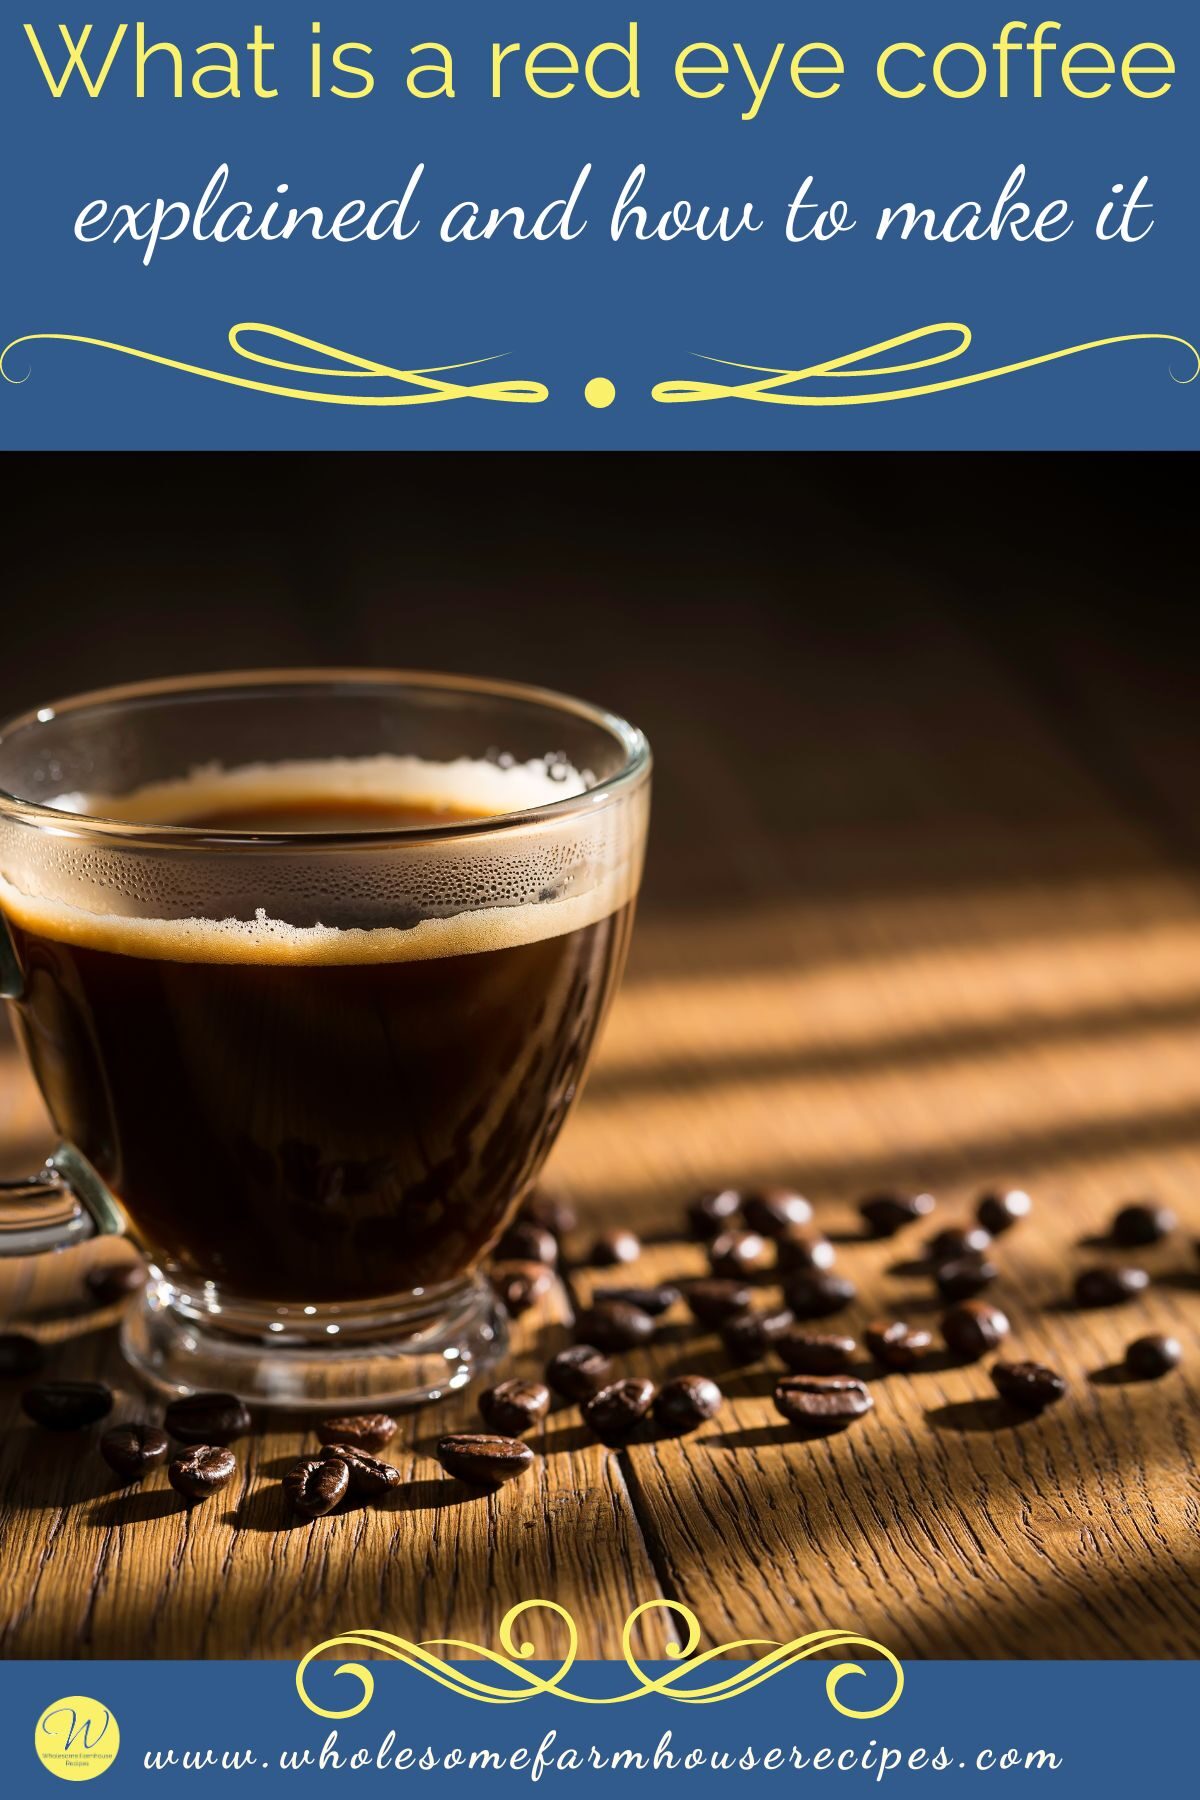 What is a red eye coffee explained and how to make it